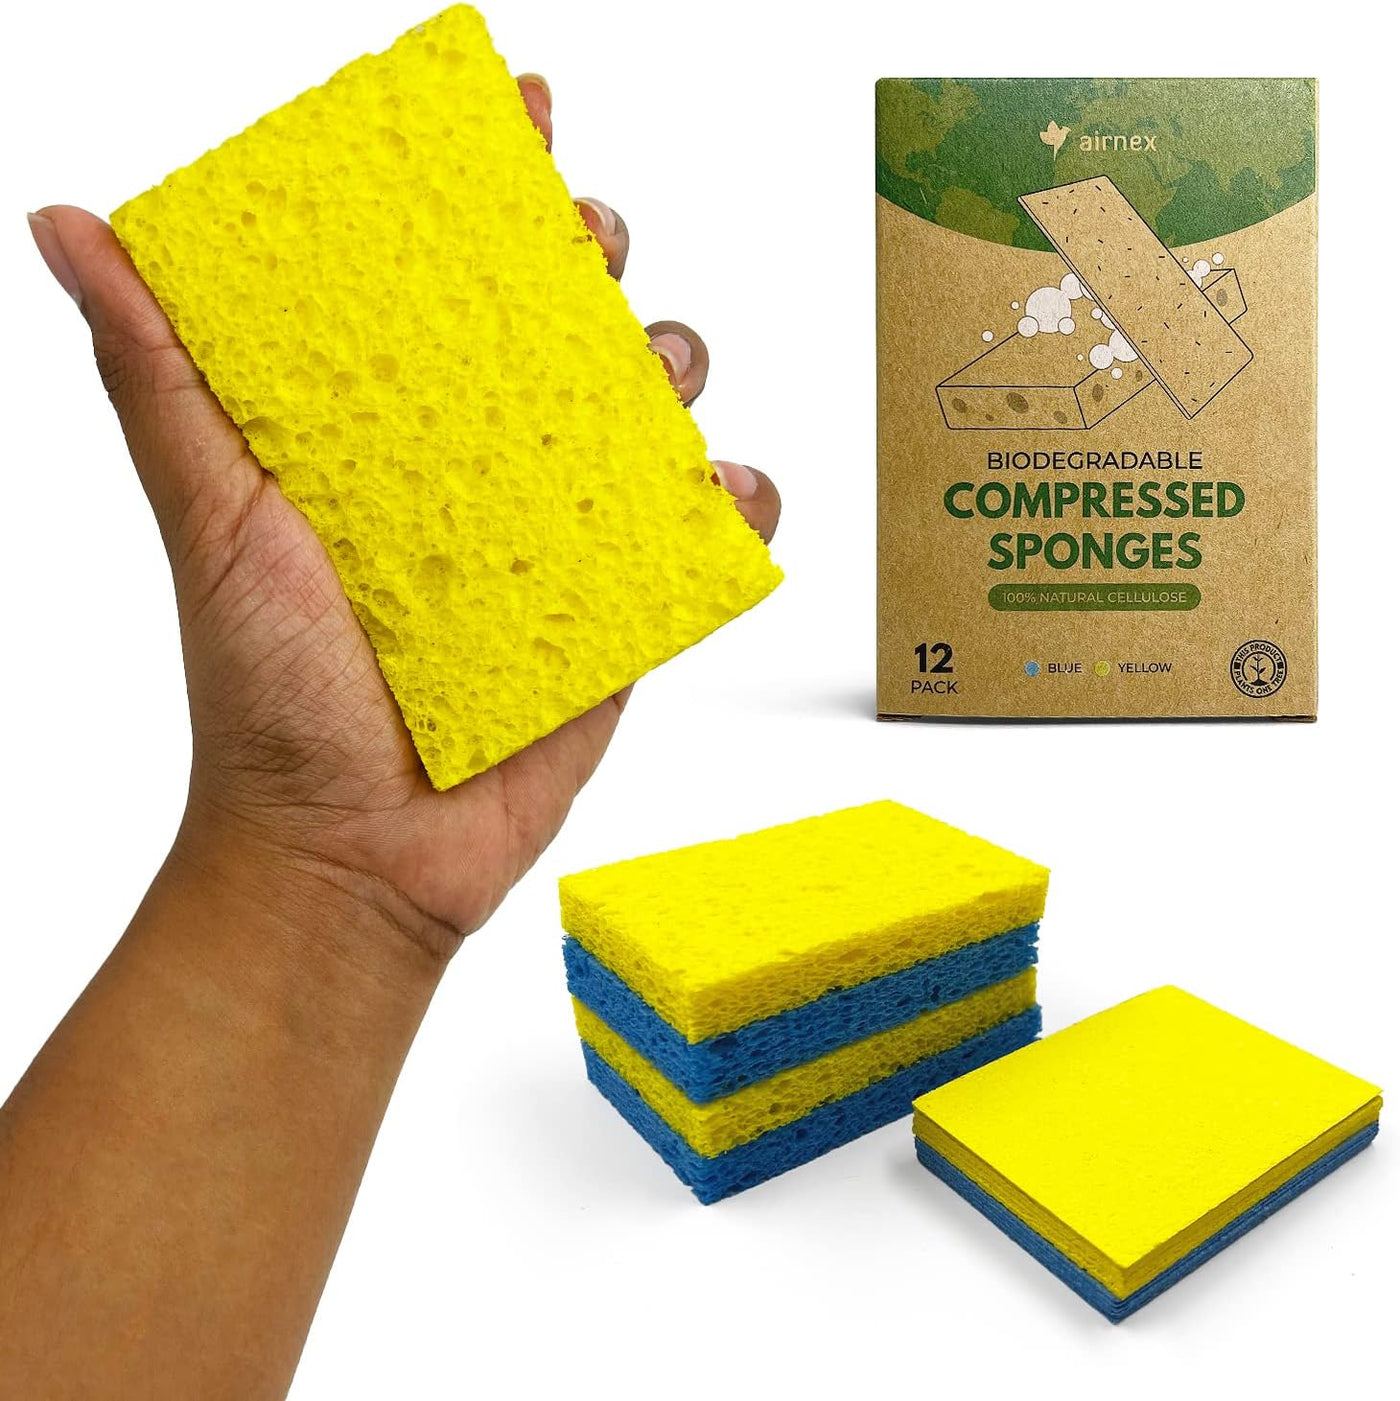 Compressed Sponges, Cellulose Sponges Kitchen for Non-Scratch Washing Dishes, Household Cleaning Scrub Natural Sponges, Pack of 12 Colorful Sponges